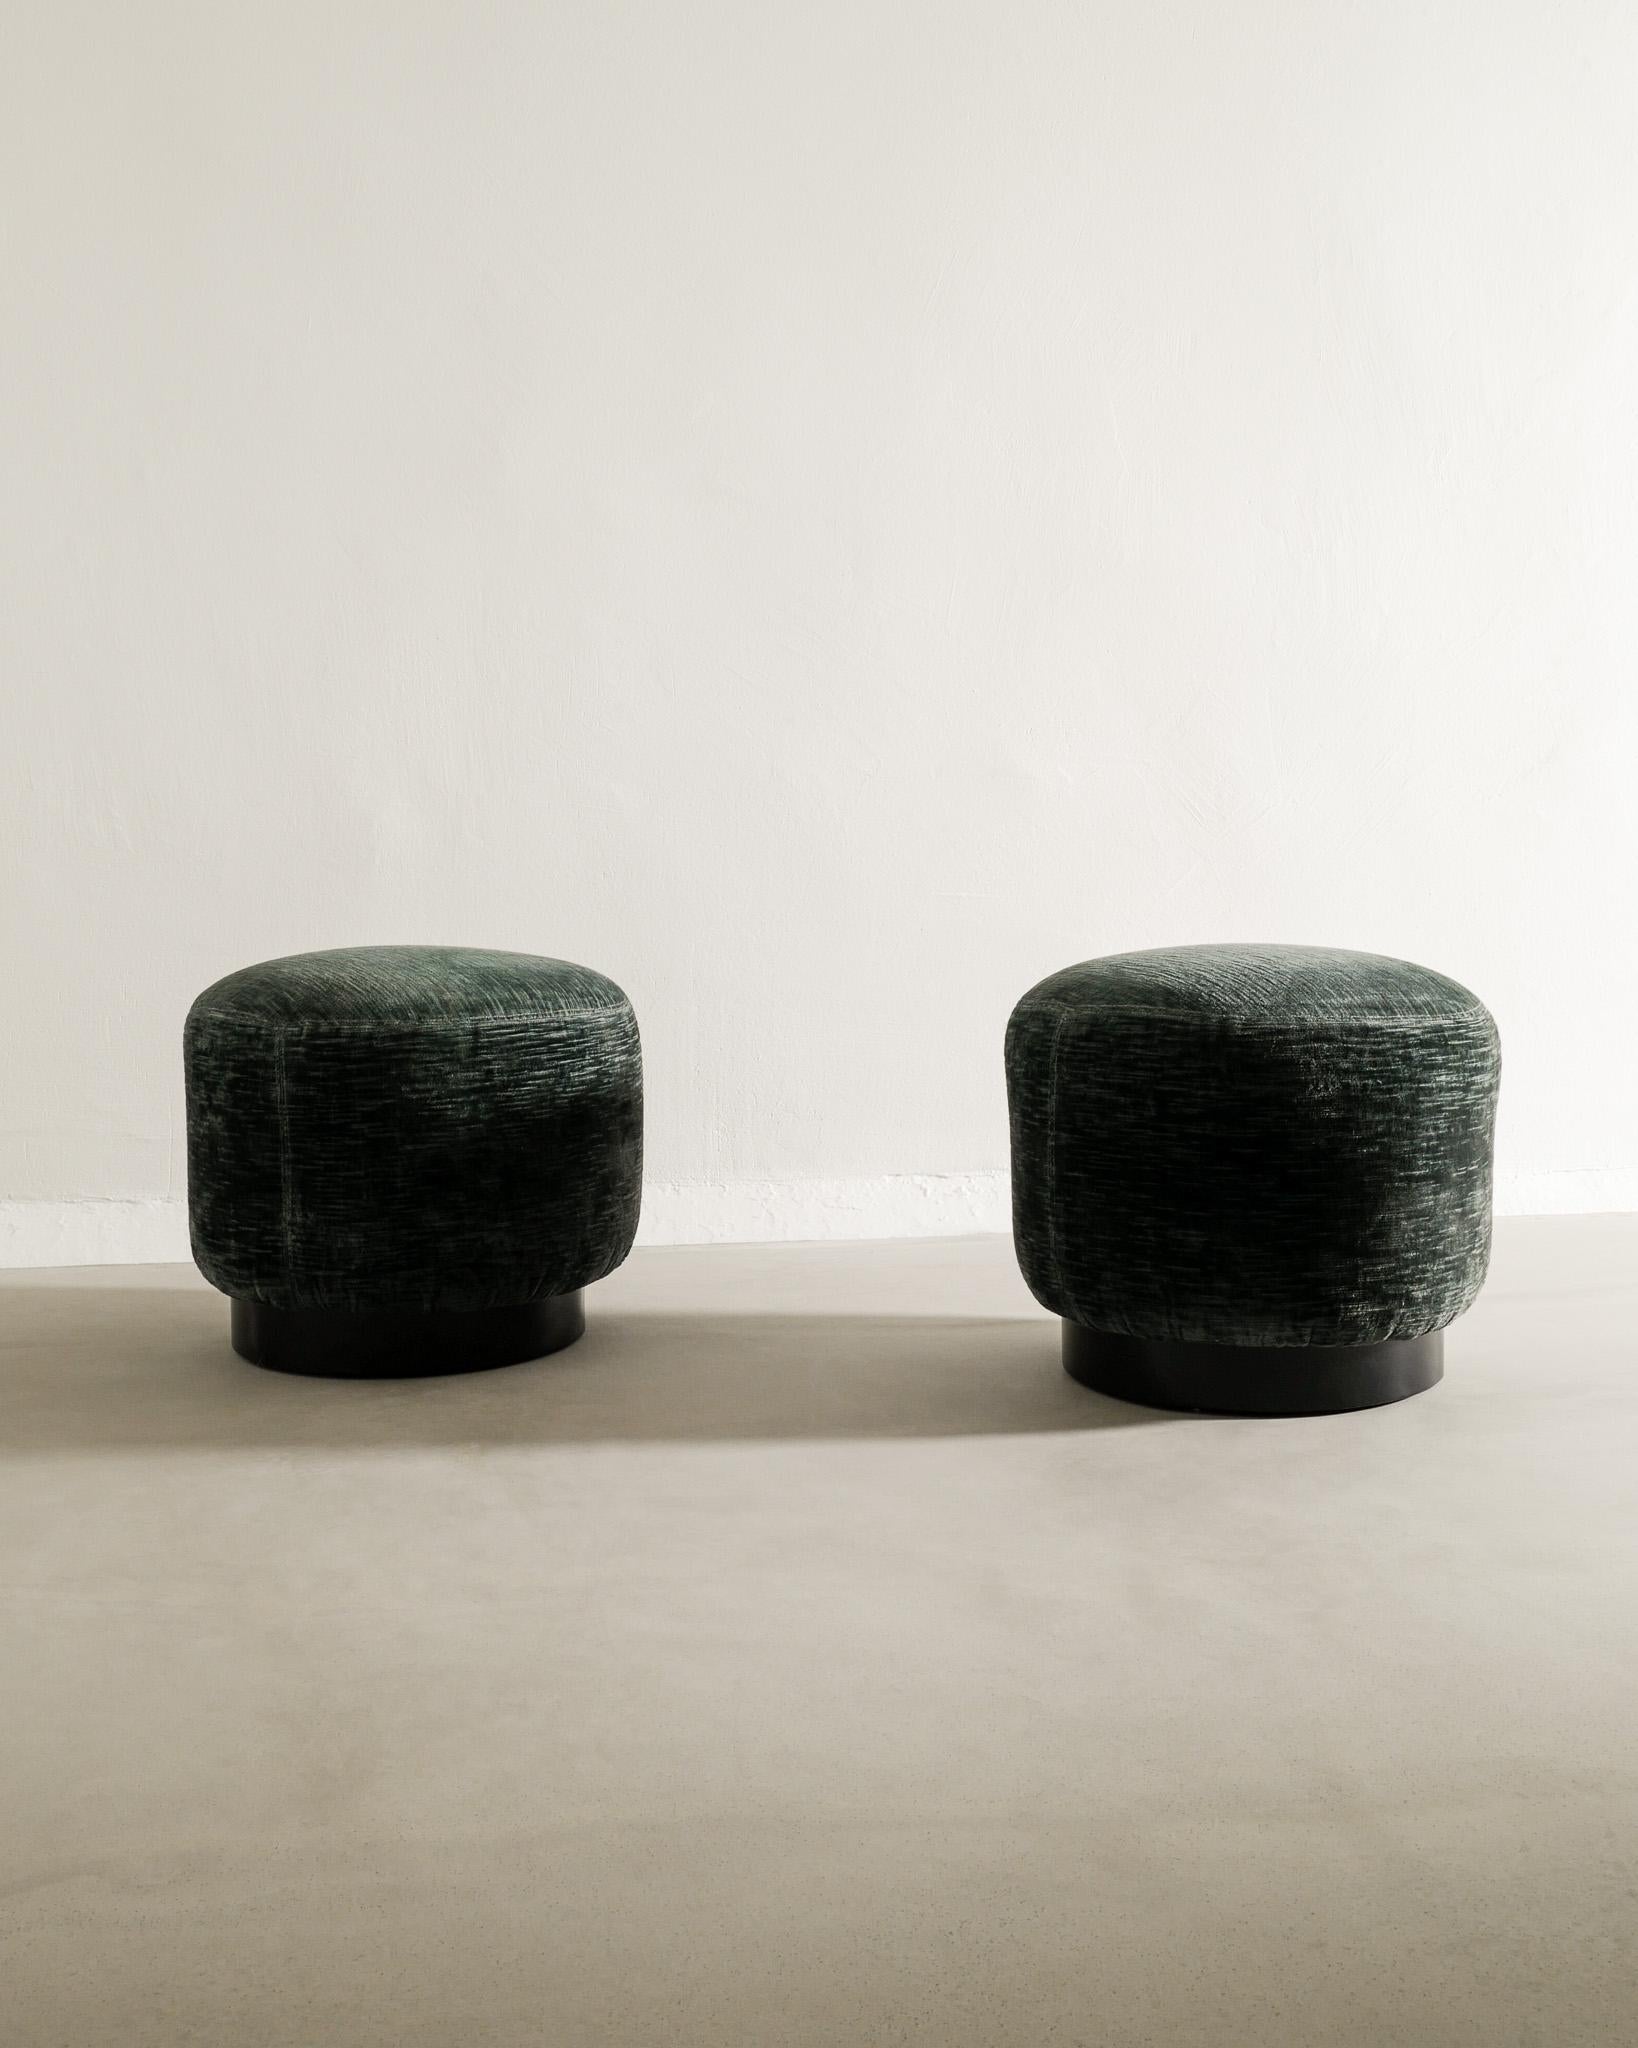 Rare pair of round Italian mid century poufs / foot stools in green original velvet with black lacquered base. In good condition. 

Dimensions: H: 40 cm / 15.75